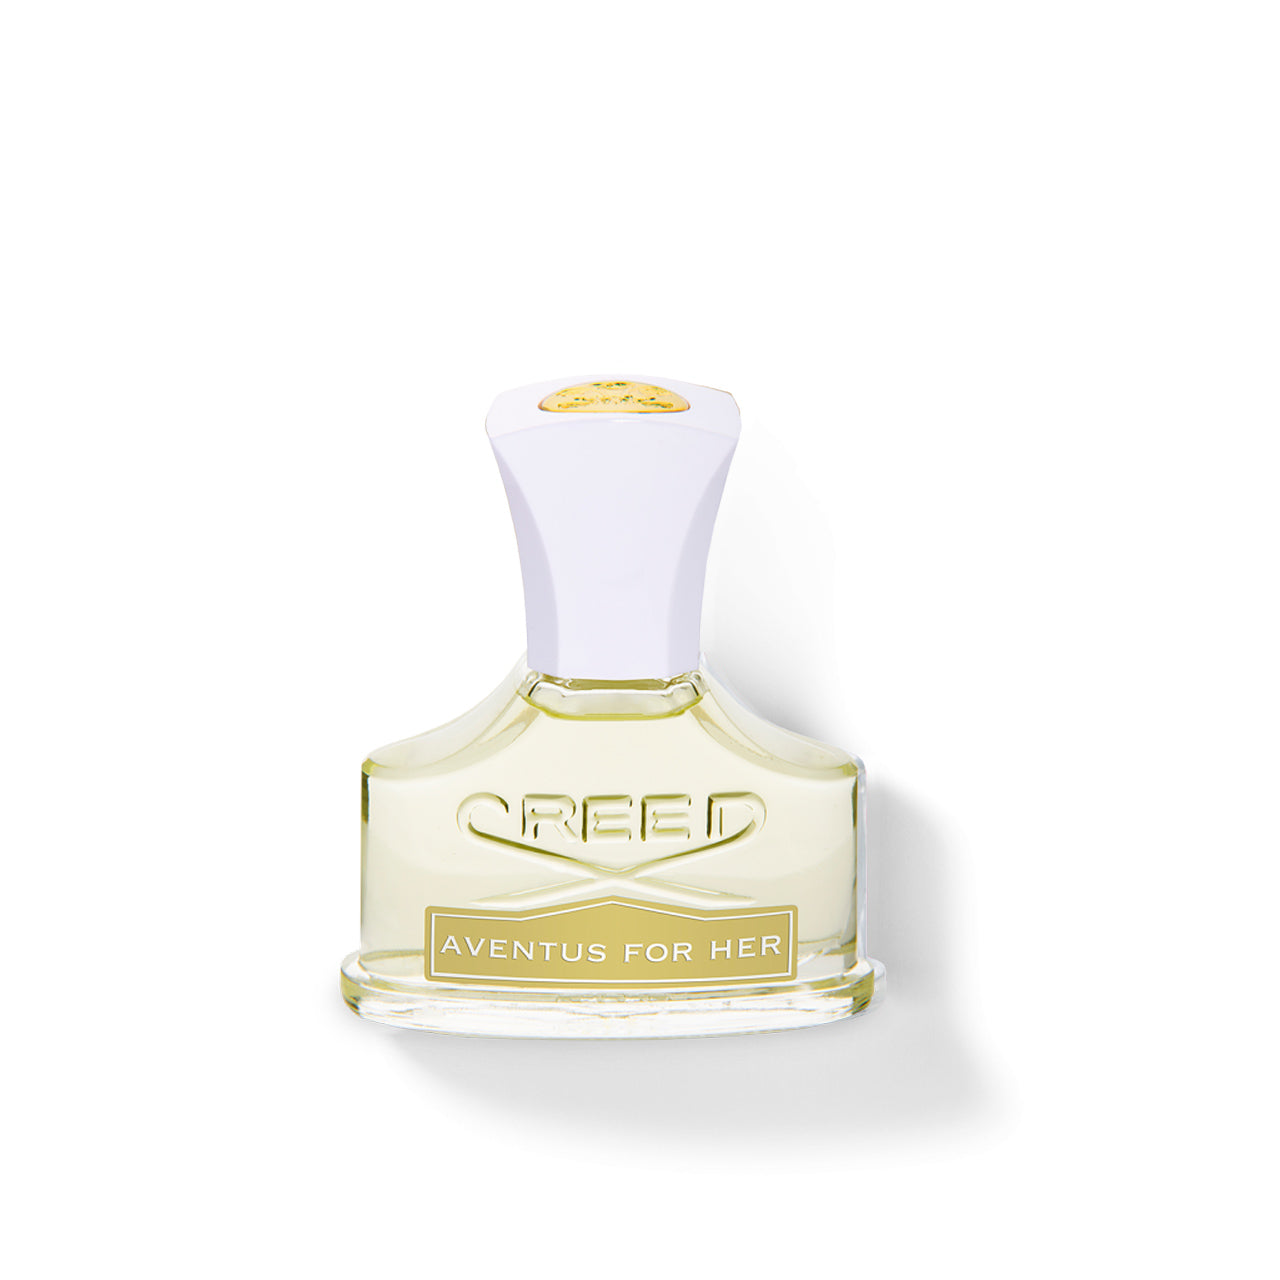 CREED AVENTUS FOR HER EDP 30 ML AVENTUS FOR HER EDP 30 ML 2000001775158 €165,00